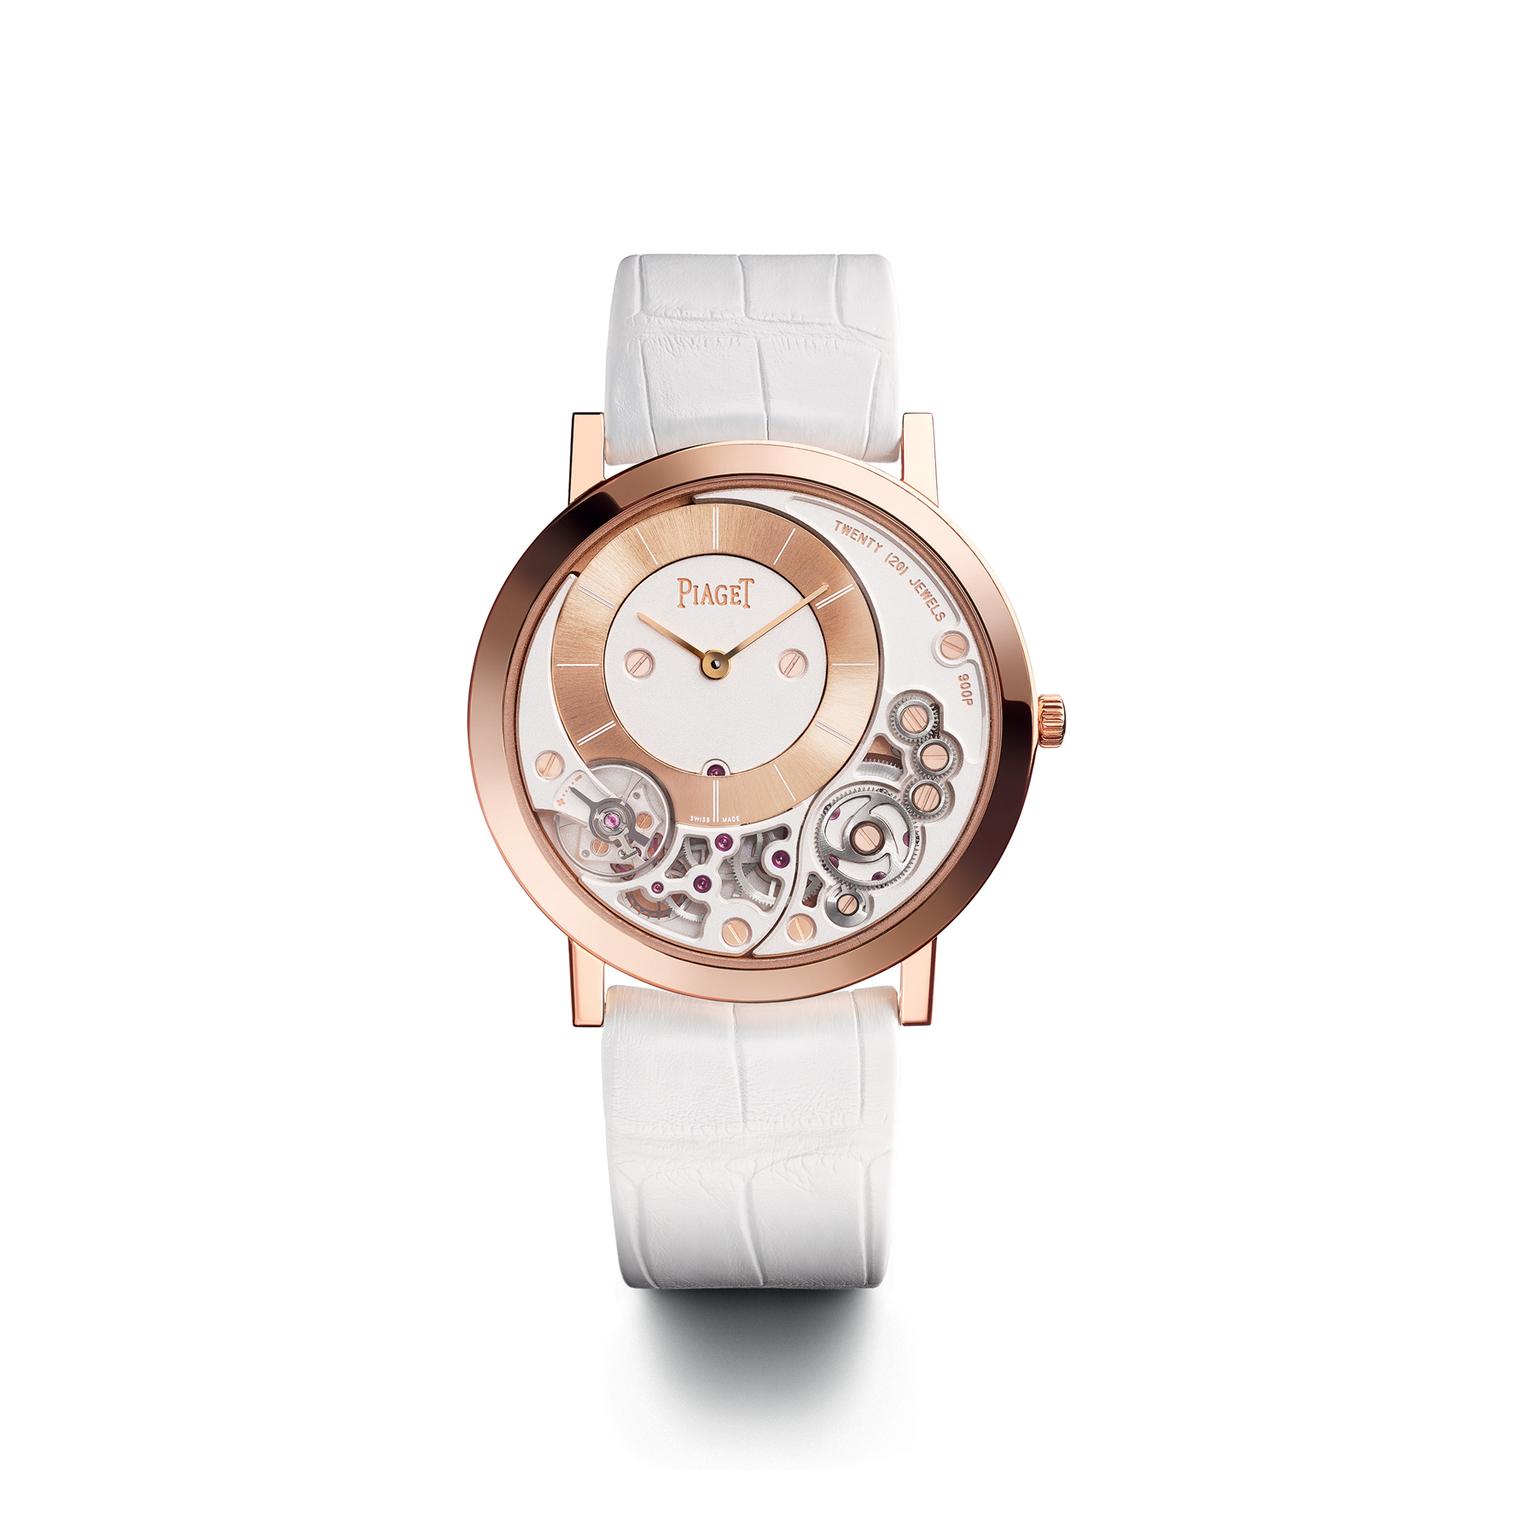 Piaget Altiplano 900P watch in pink gold